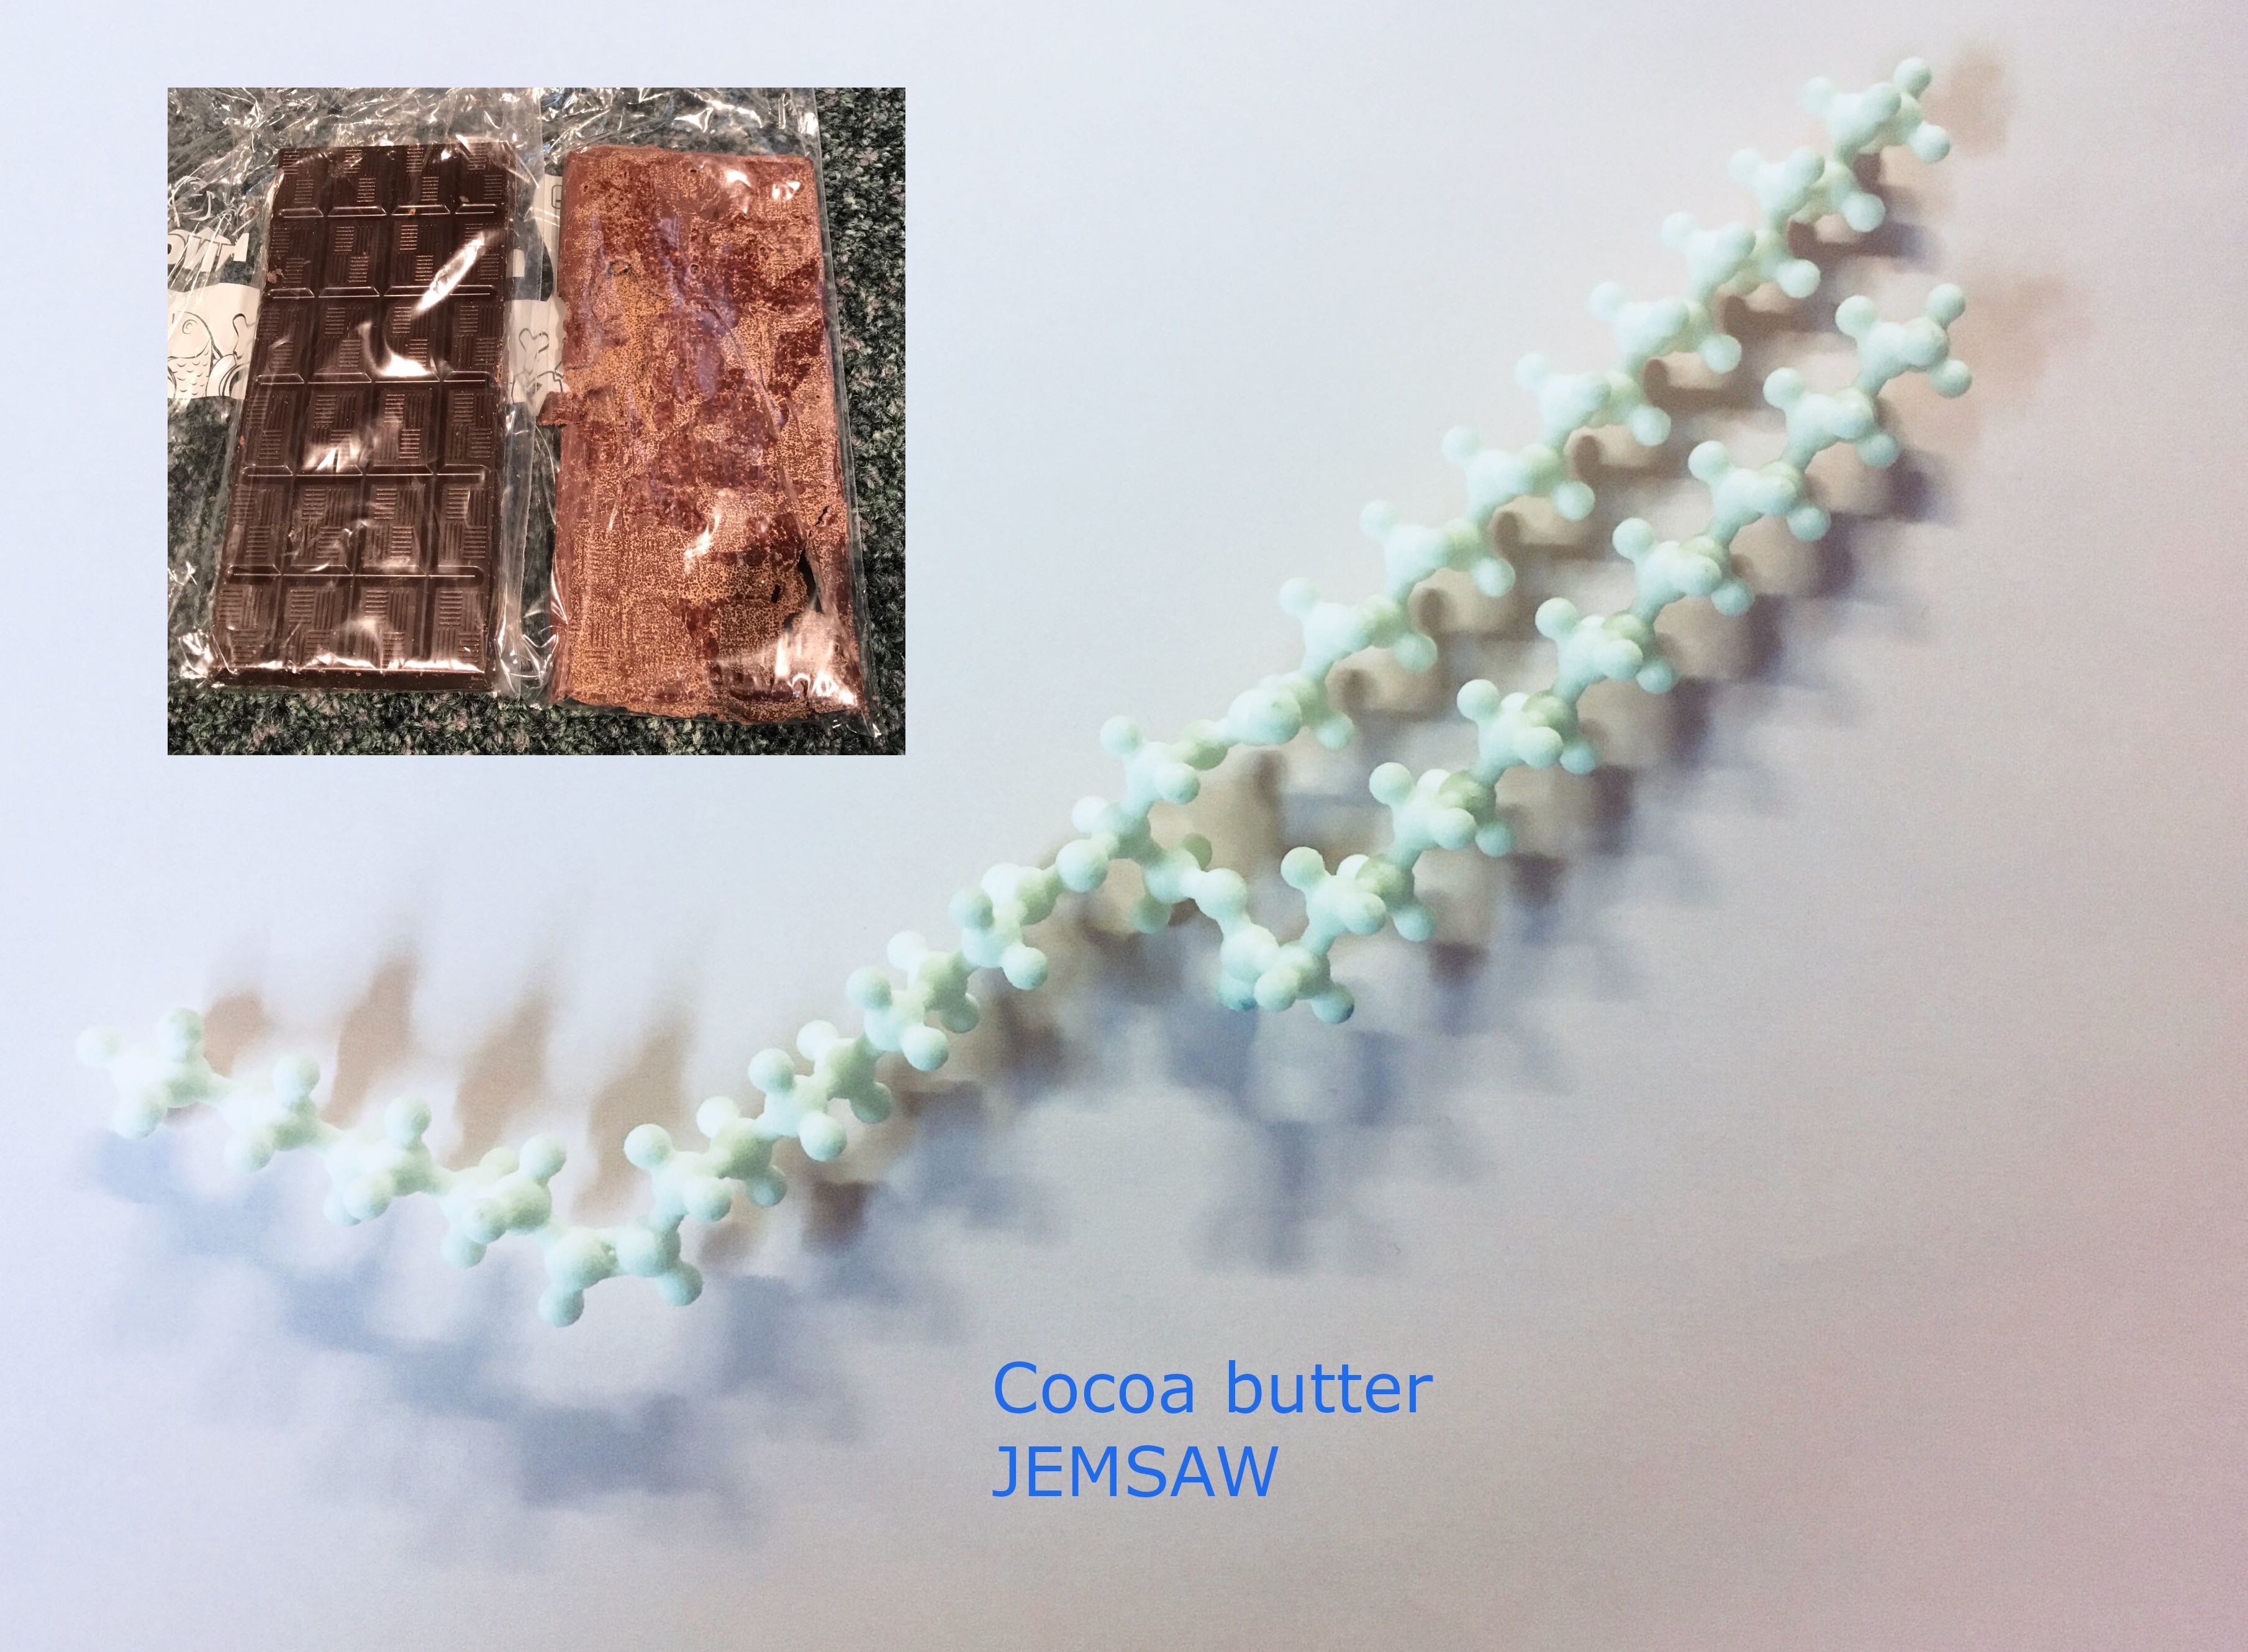 3D printed model of cocoa butter with different polymorphs of chocolate